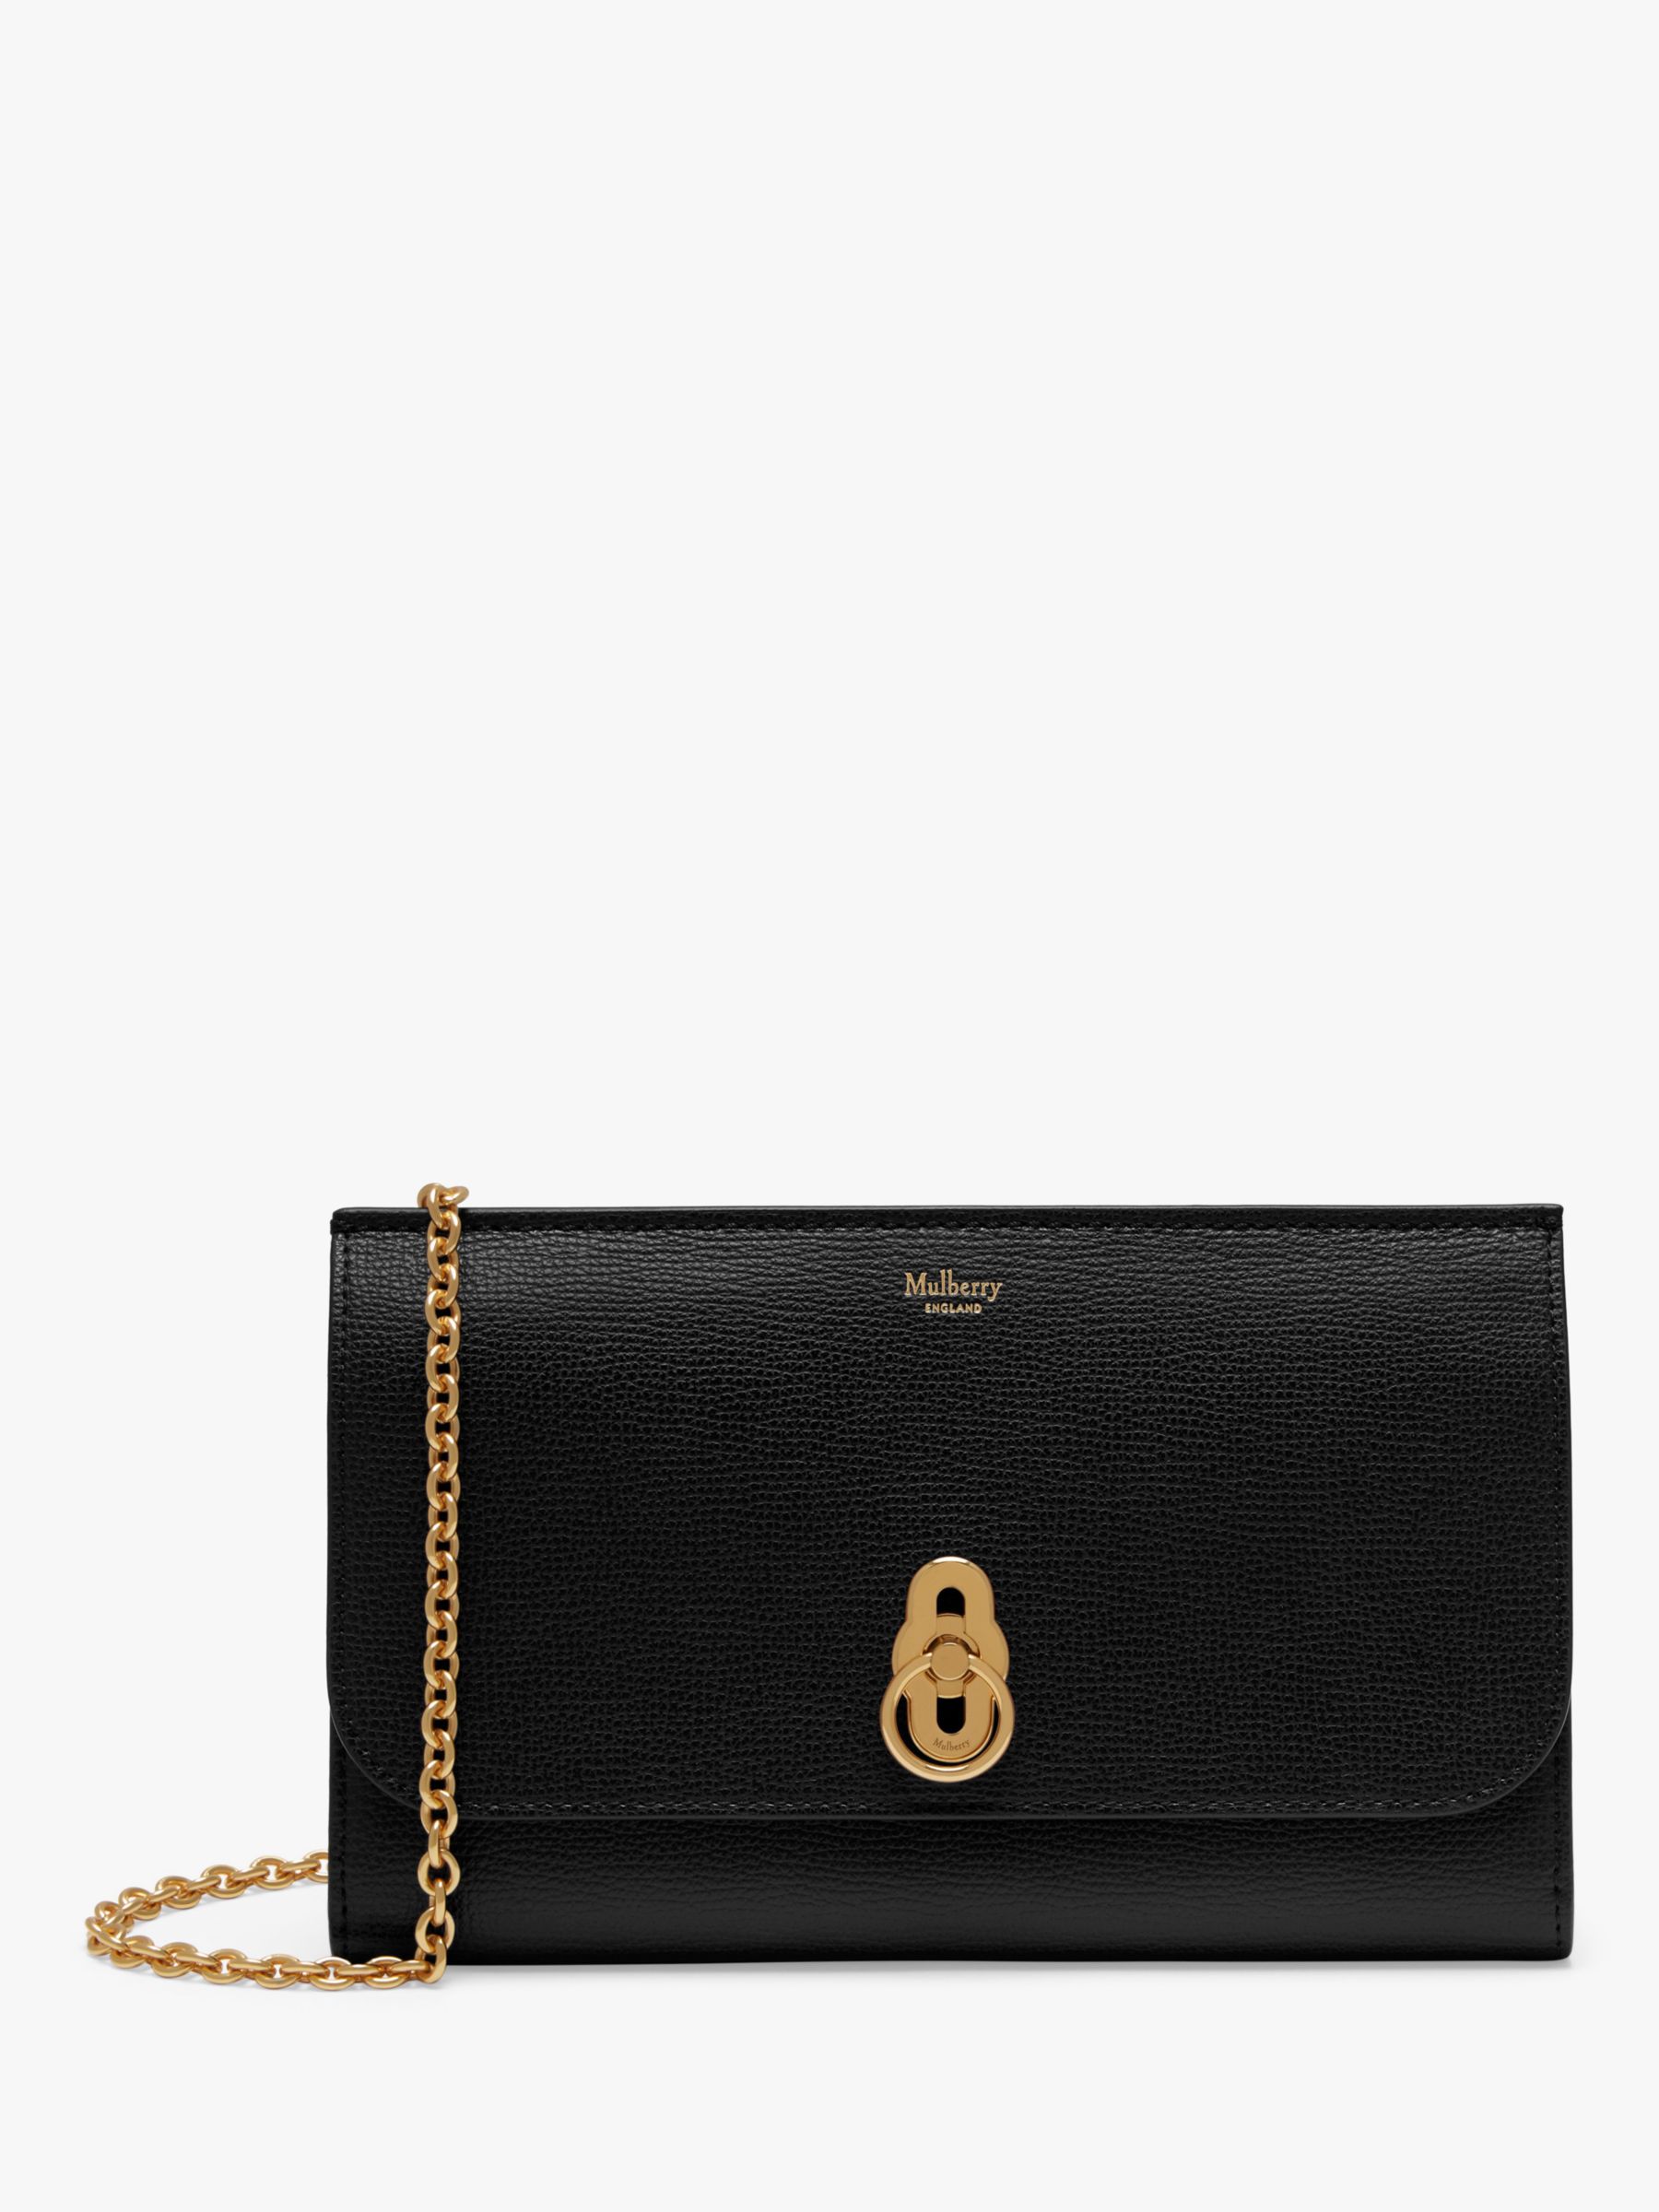 Mulberry Amberley Small Classic Grain Leather Clutch Bag, Black at John ...